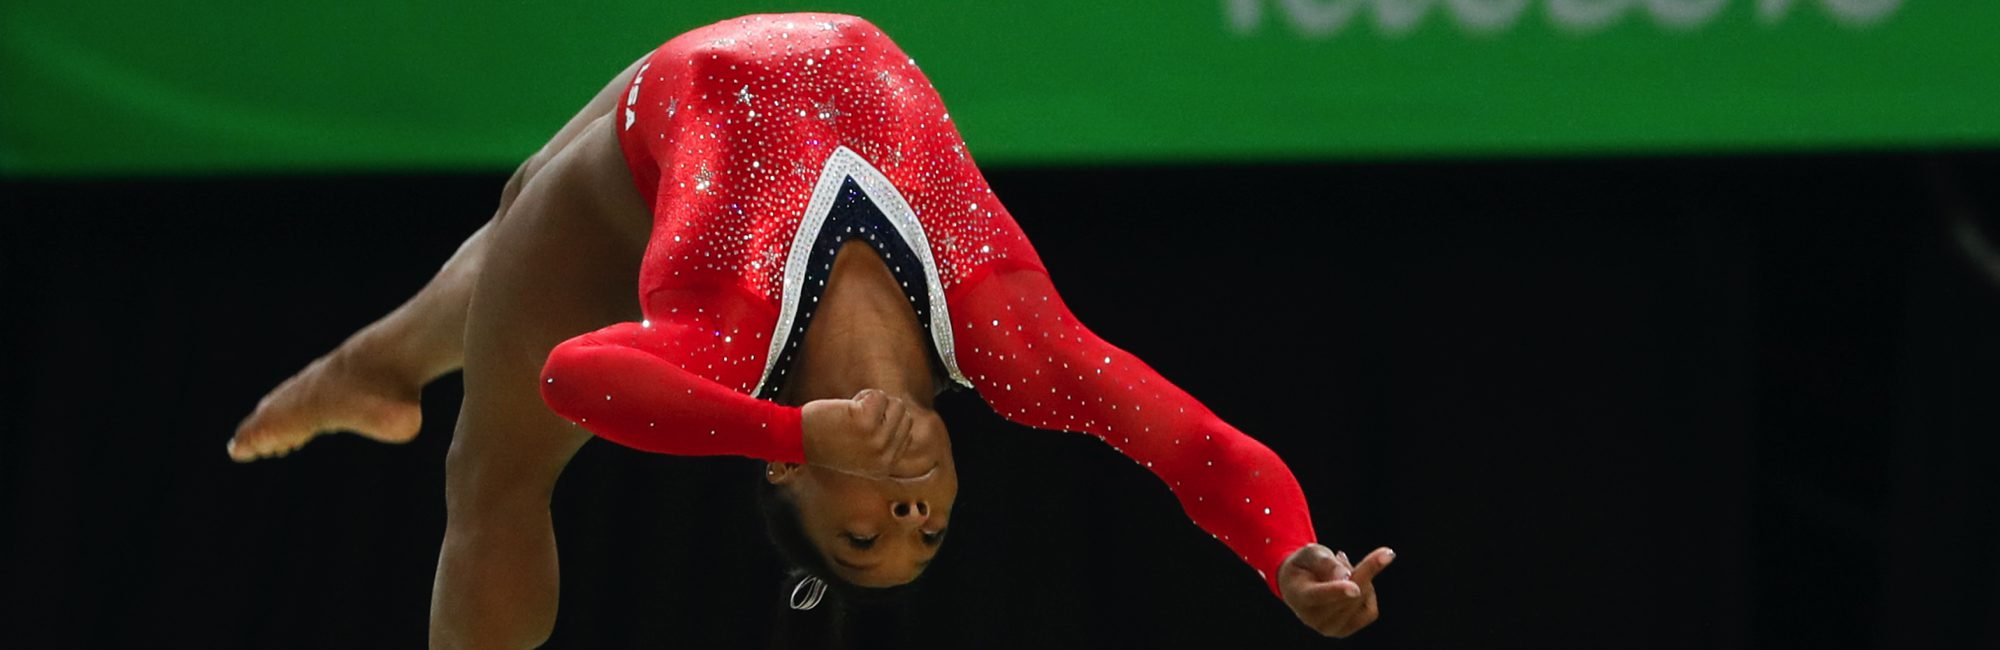 Simone Biles in mid-air competition at 2016 Rio Olympics